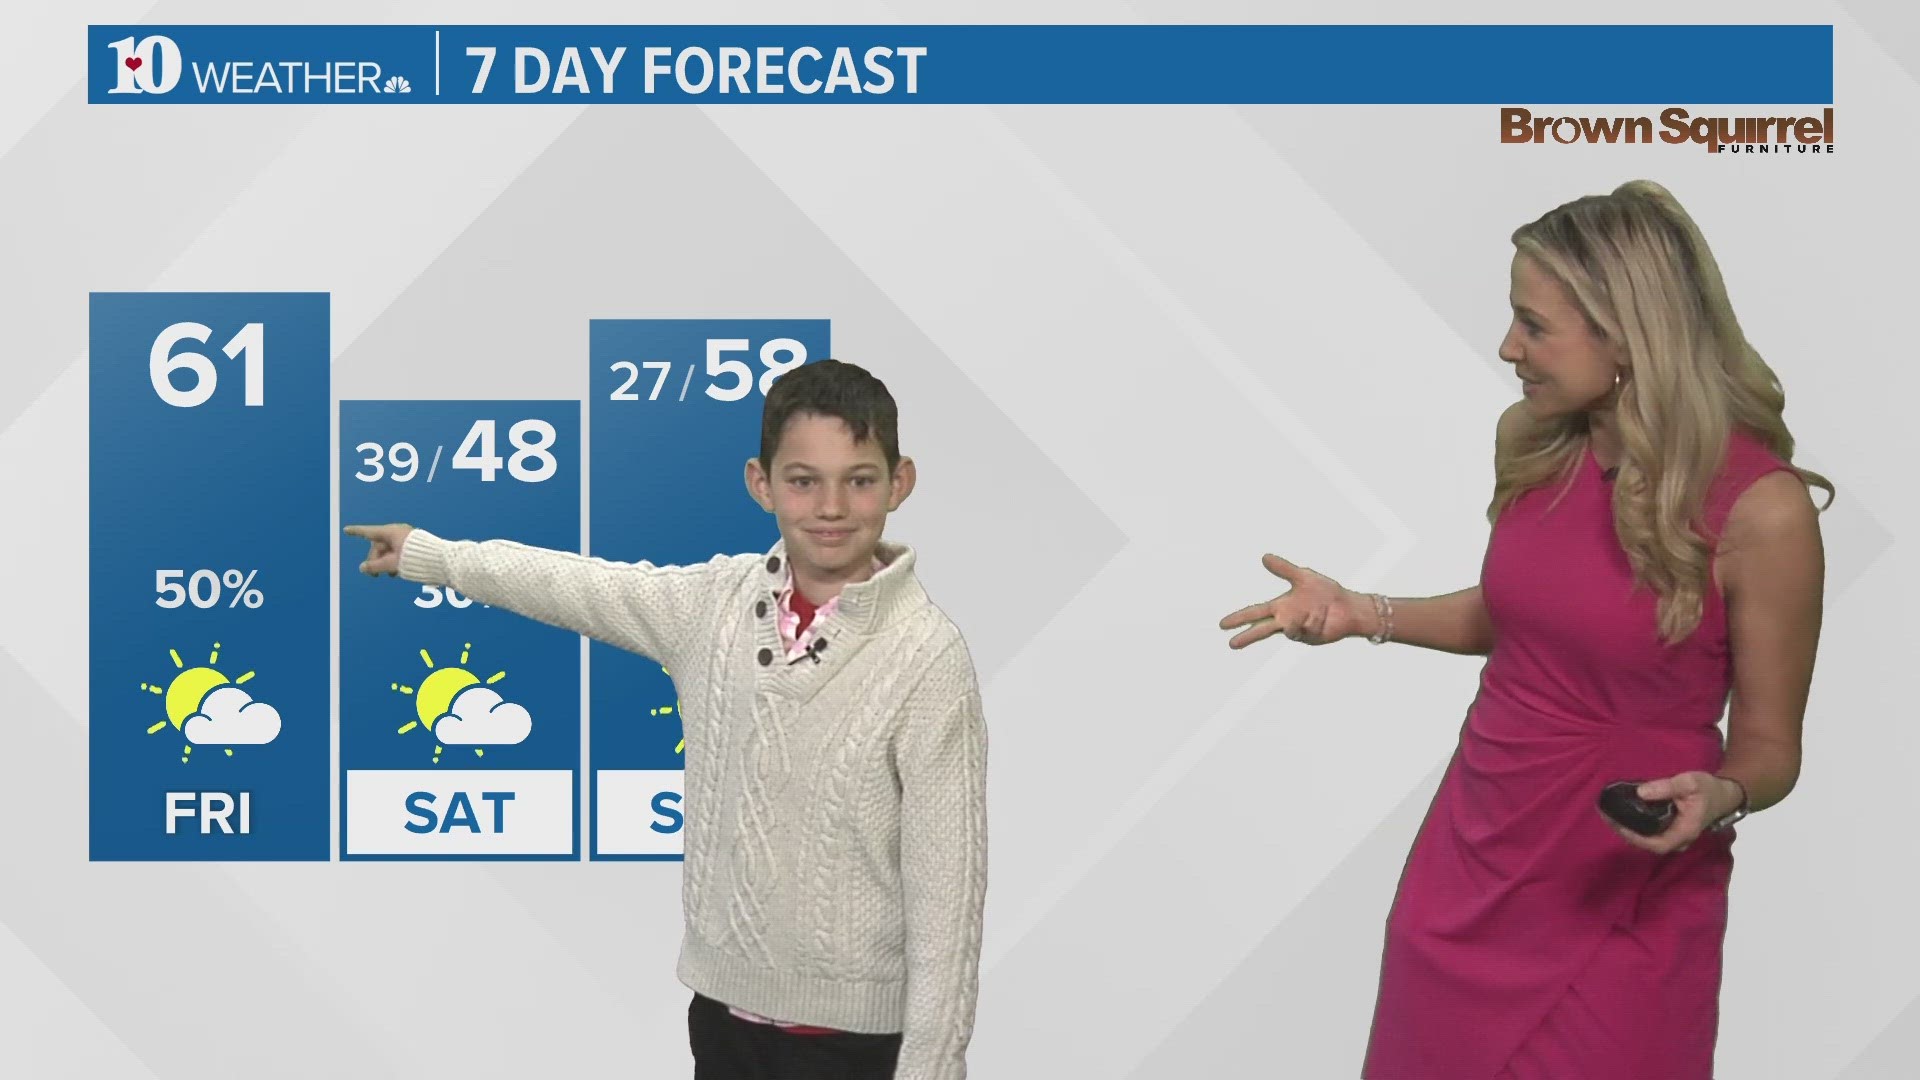 Nathaniel is a big fan of snow and shows us how the mountains may see some this weekend!